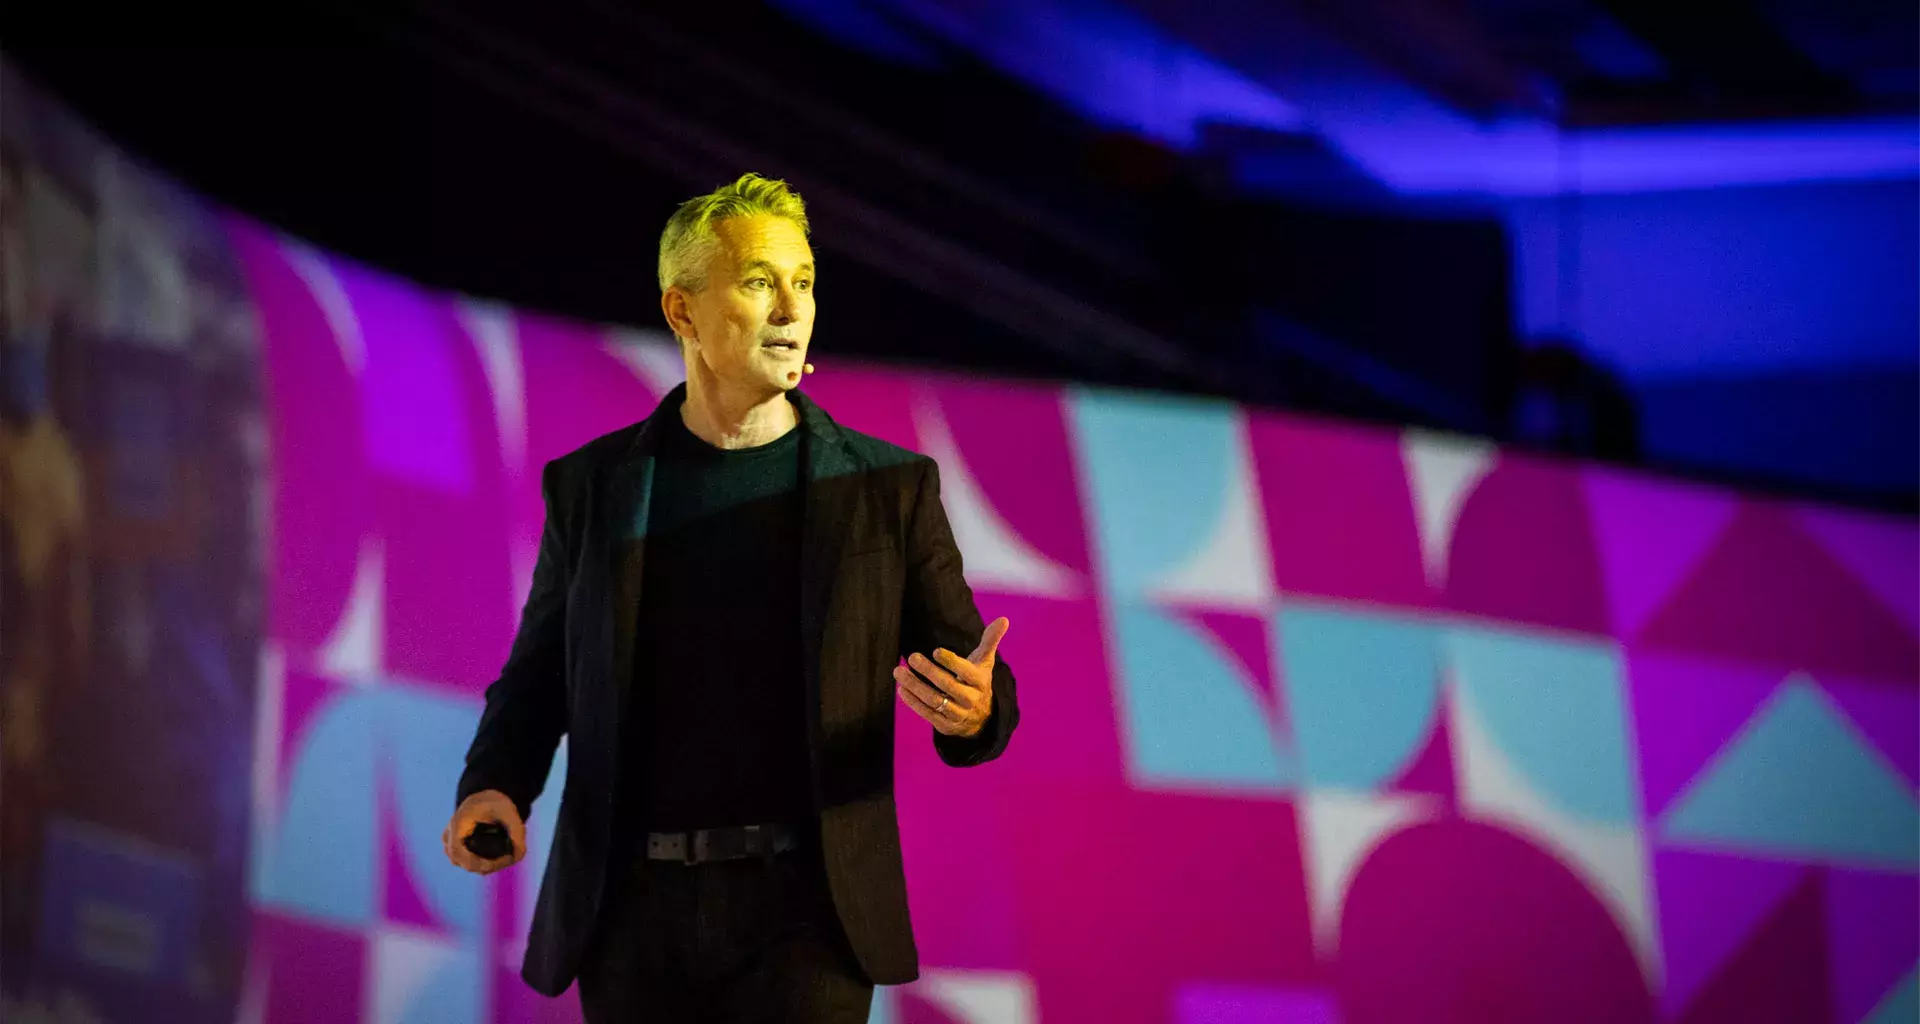 Simon Mainwaring appeared at INCmty 2022 to share 6 mindsets of CEOs of successful companies.